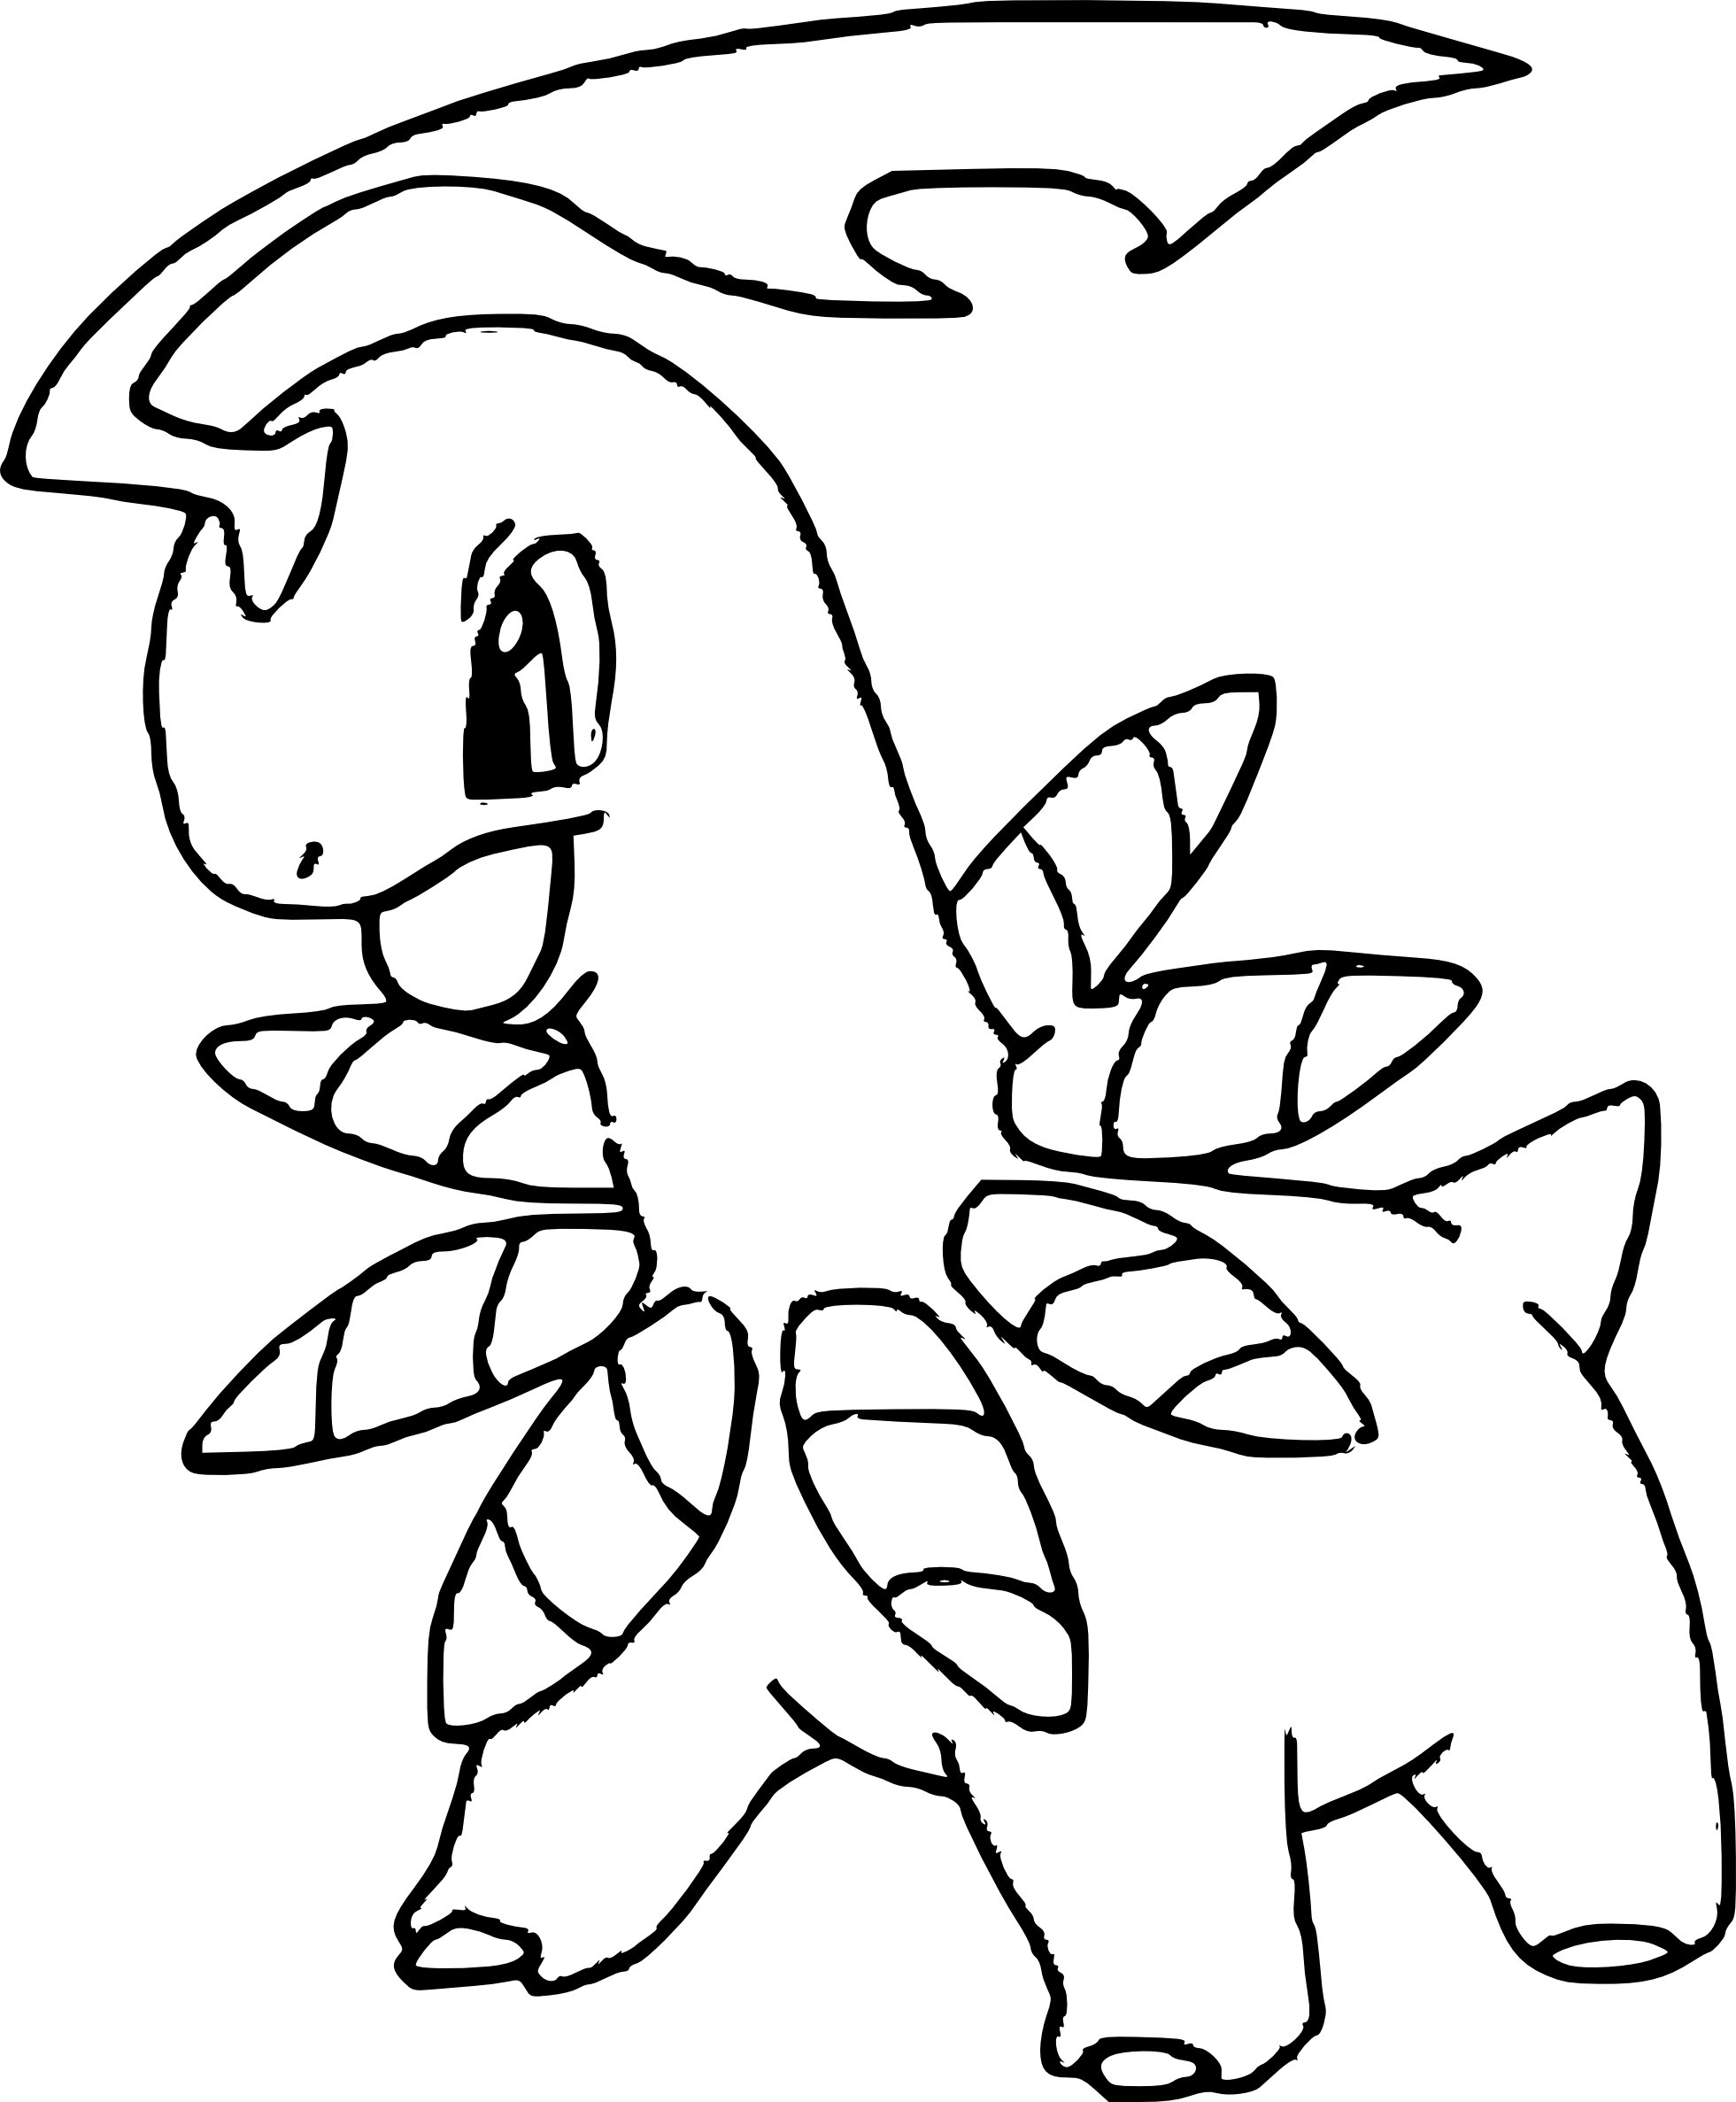 Bayleef Pokemon coloring page